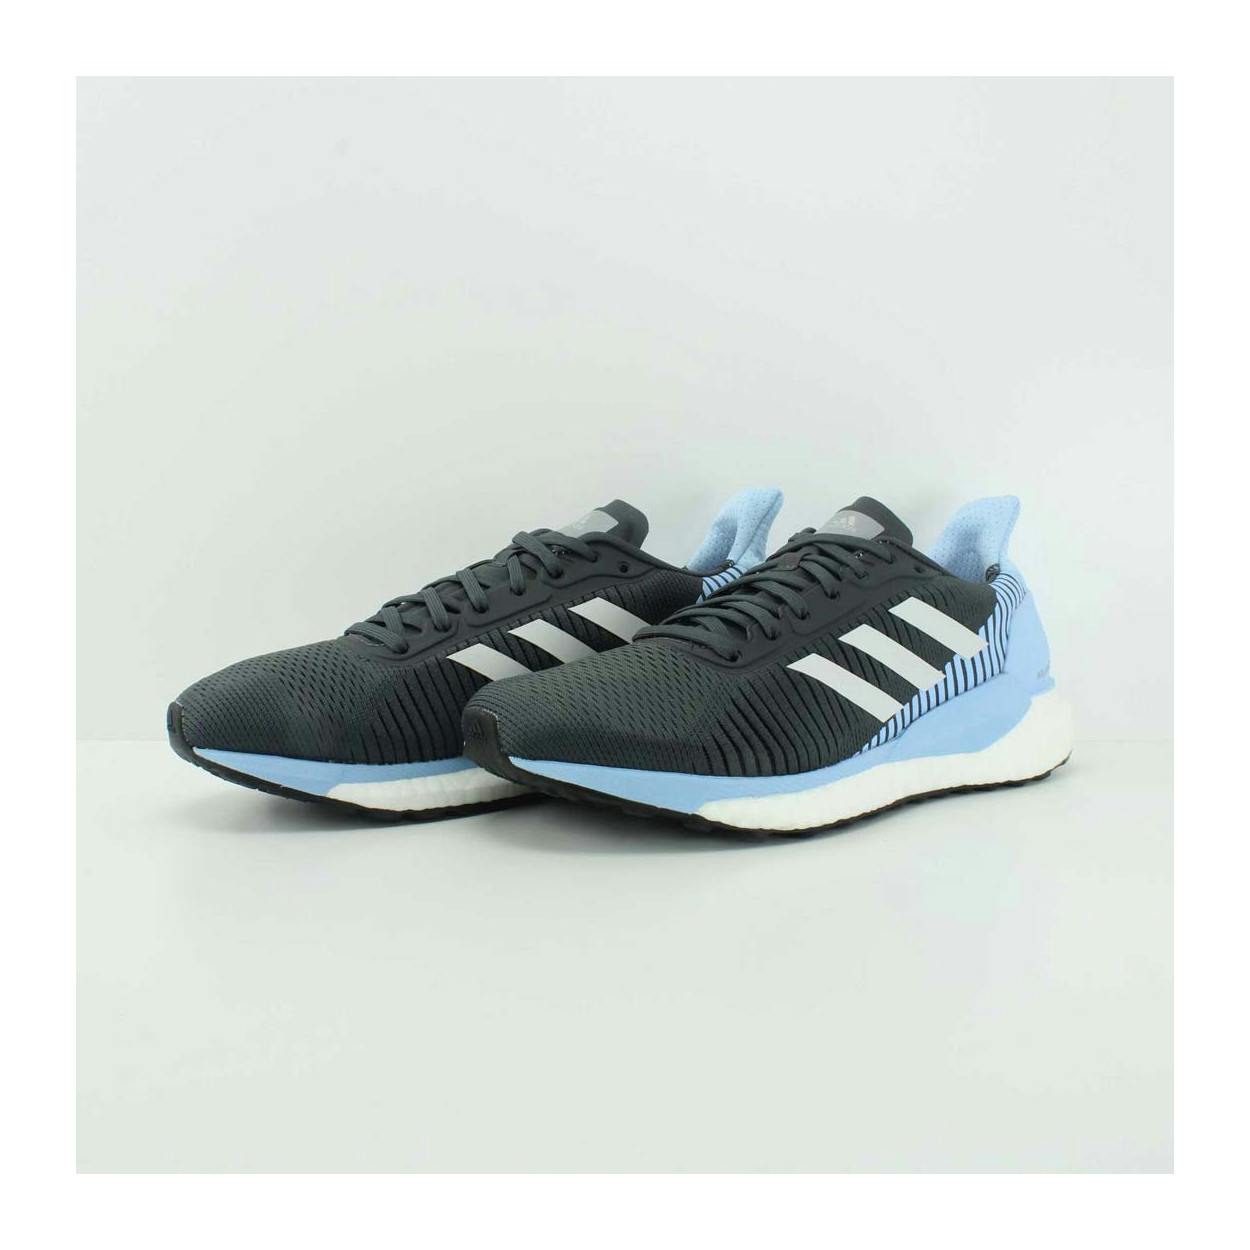 Rally monster langzaam adidas SolarGLIDE ST 19 Dames | All4running